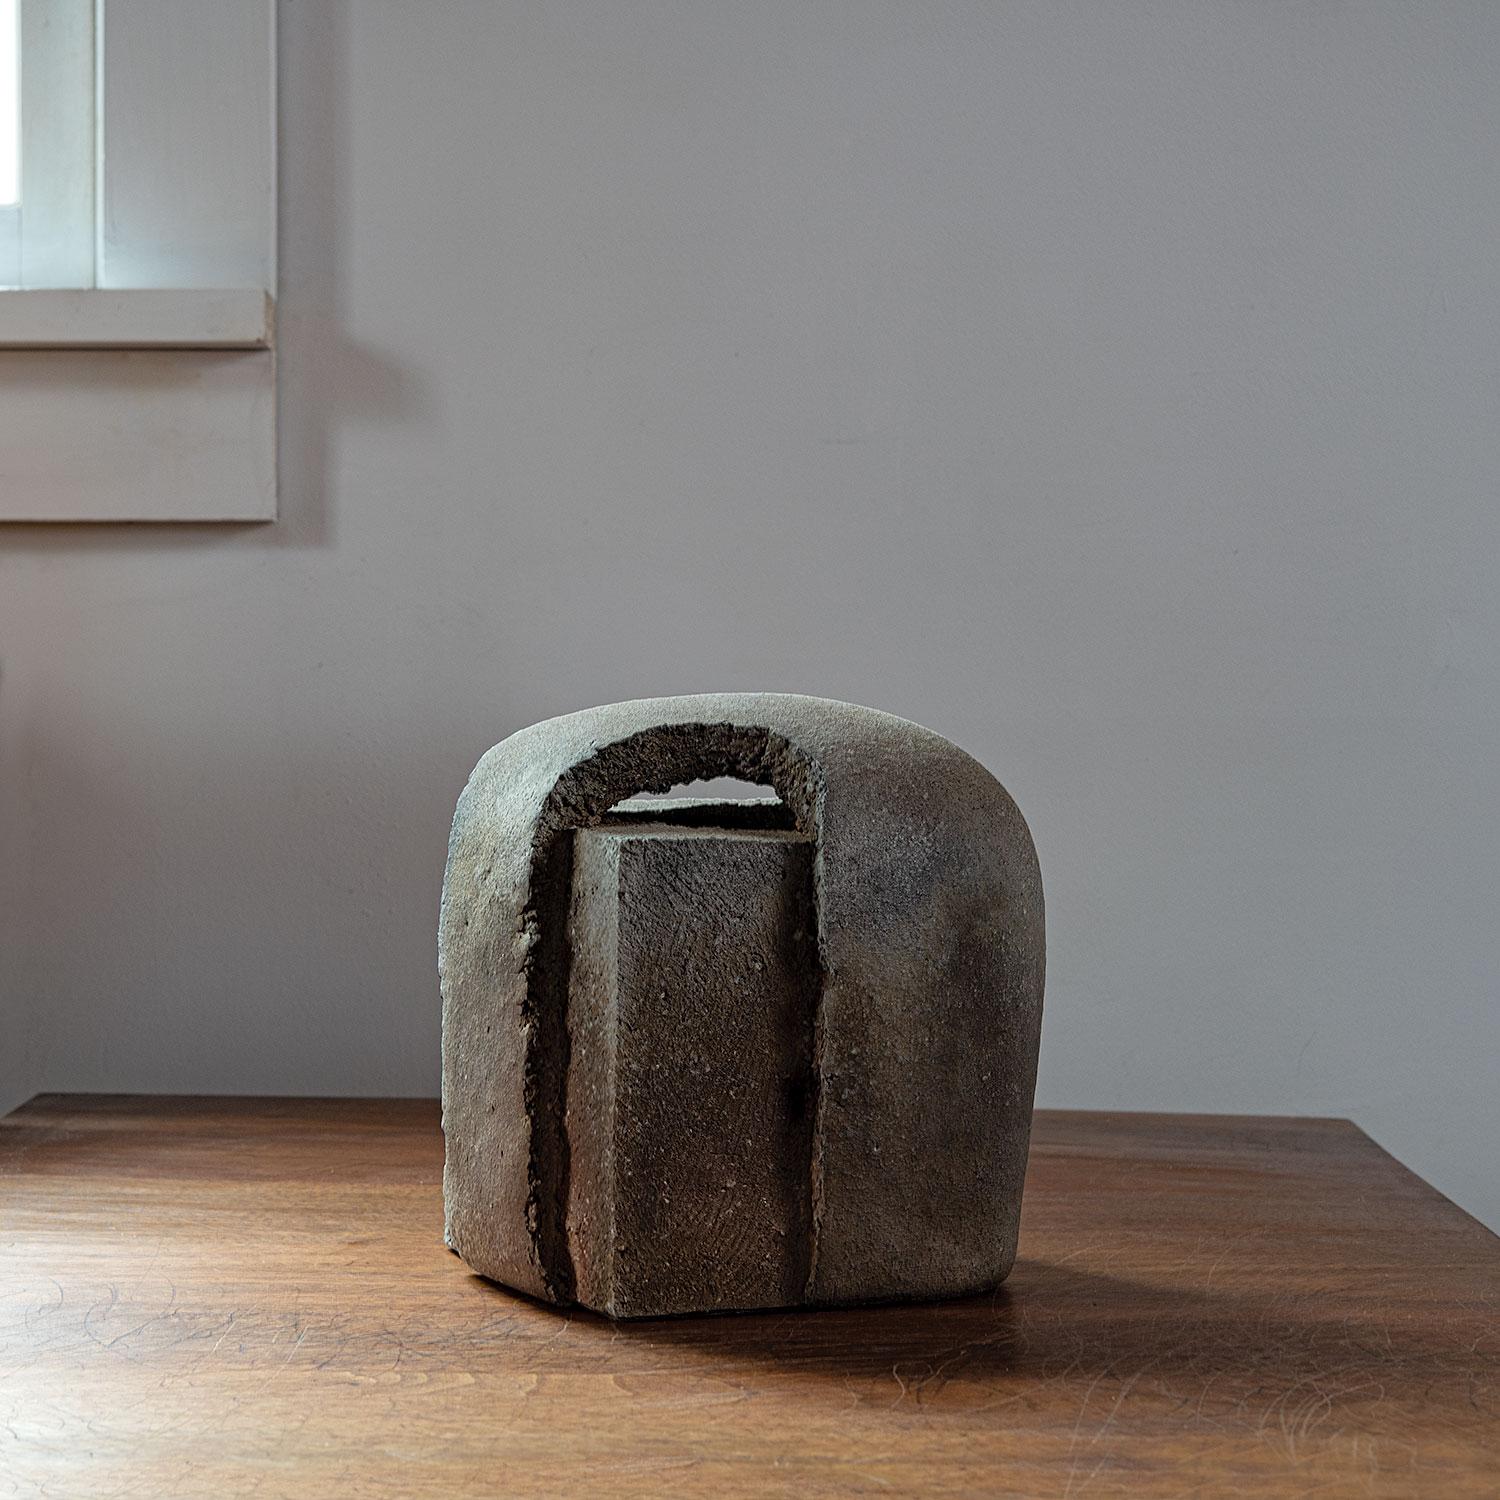 Yasuhisa Kohyama shapes his asymmetrical forms using piano wire, creating distinctive rough surfaces. The clay with its feldspar nuggets creates a tactile quality rarely seen in contemporary work. No glaze is used, but the wood ash and placement in